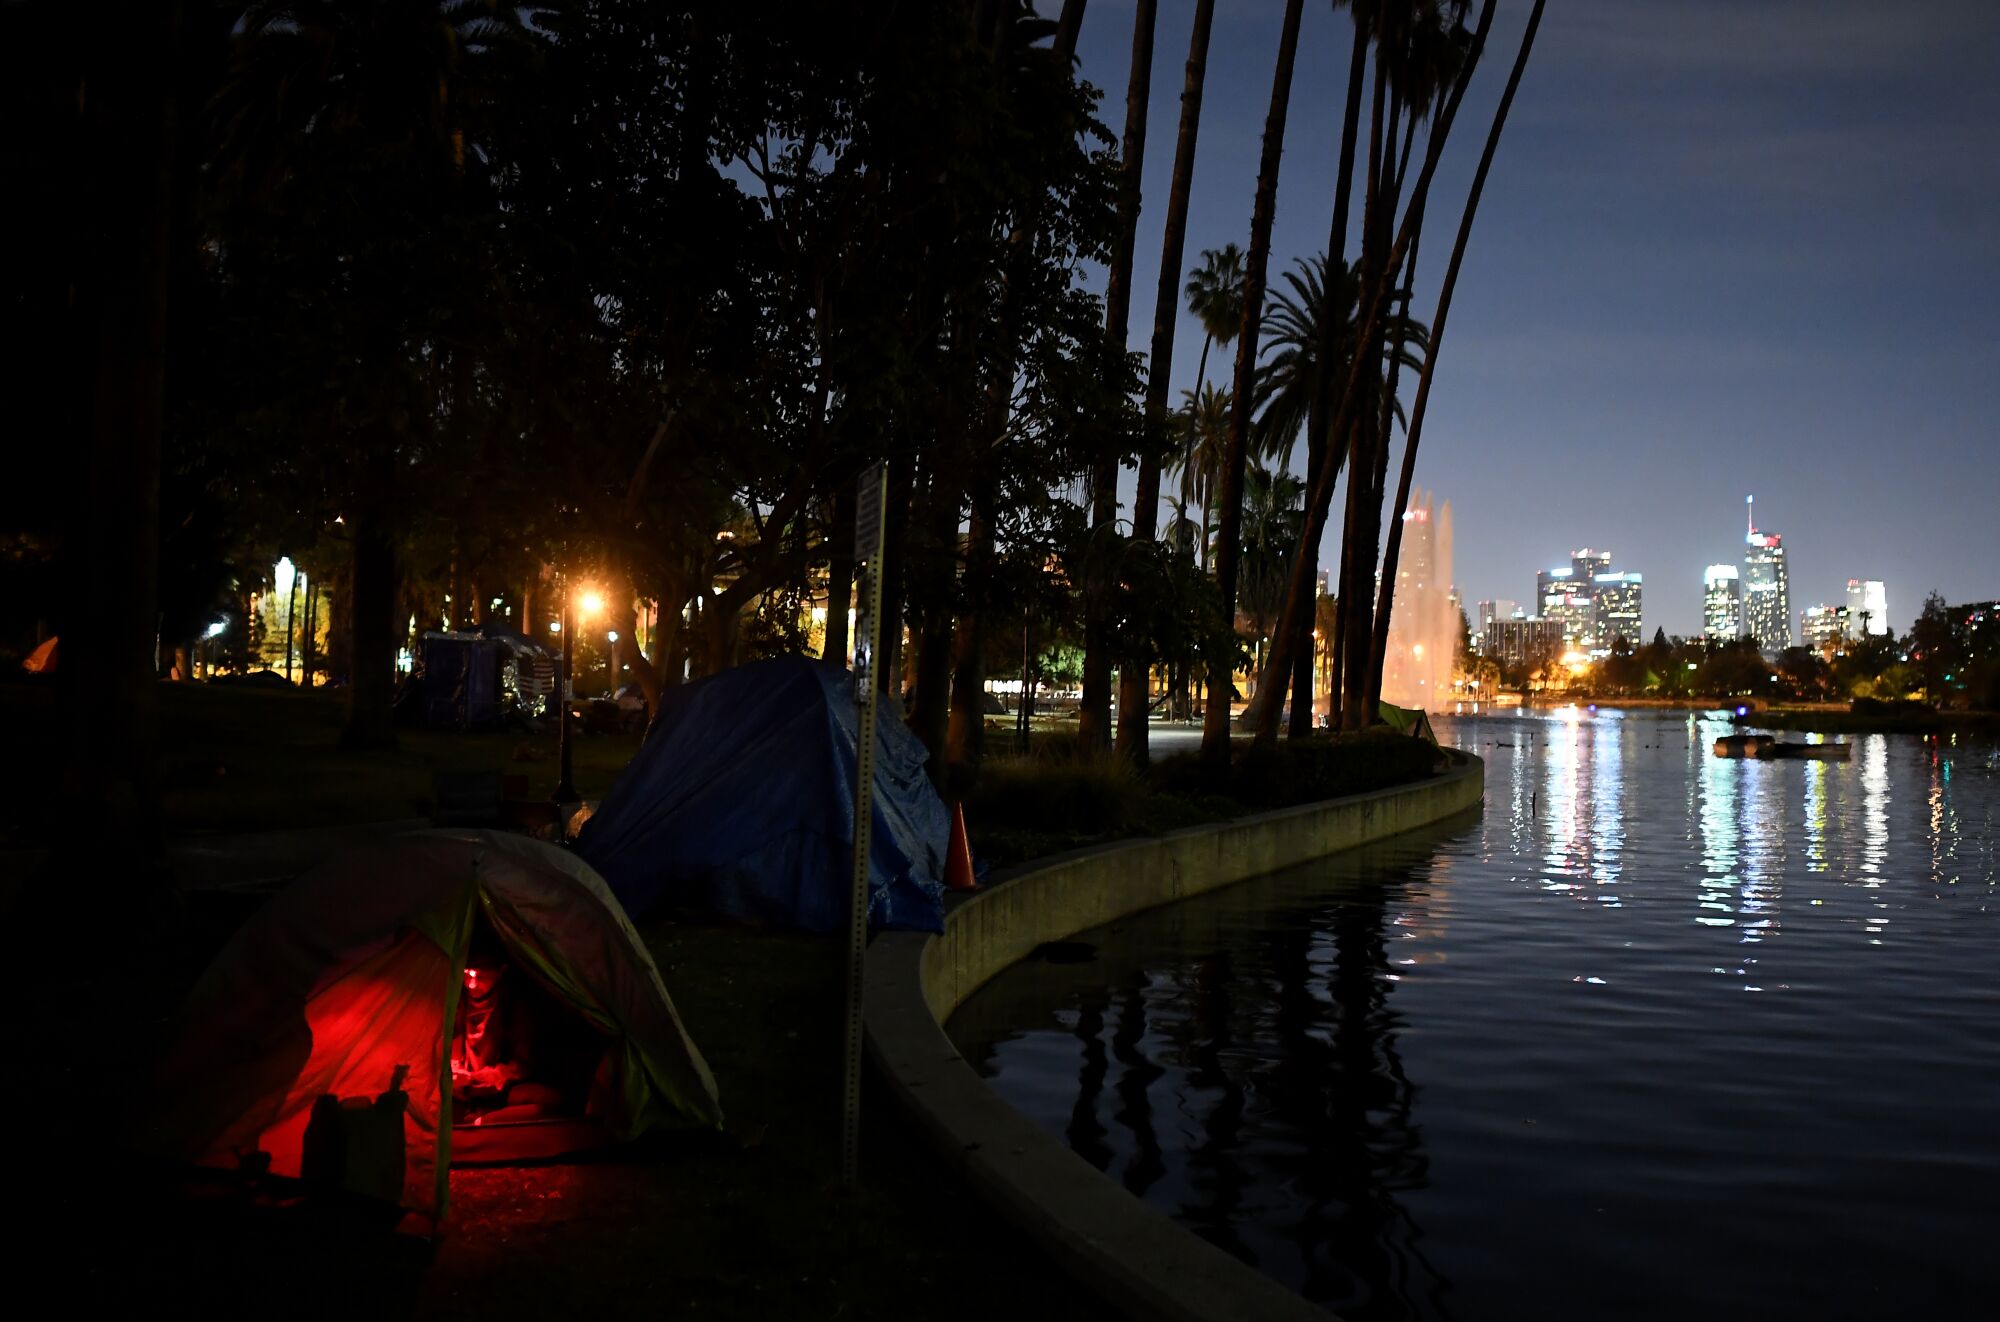 A glow is visible inside a tent along a lake after dark, with the city skyline in the background.